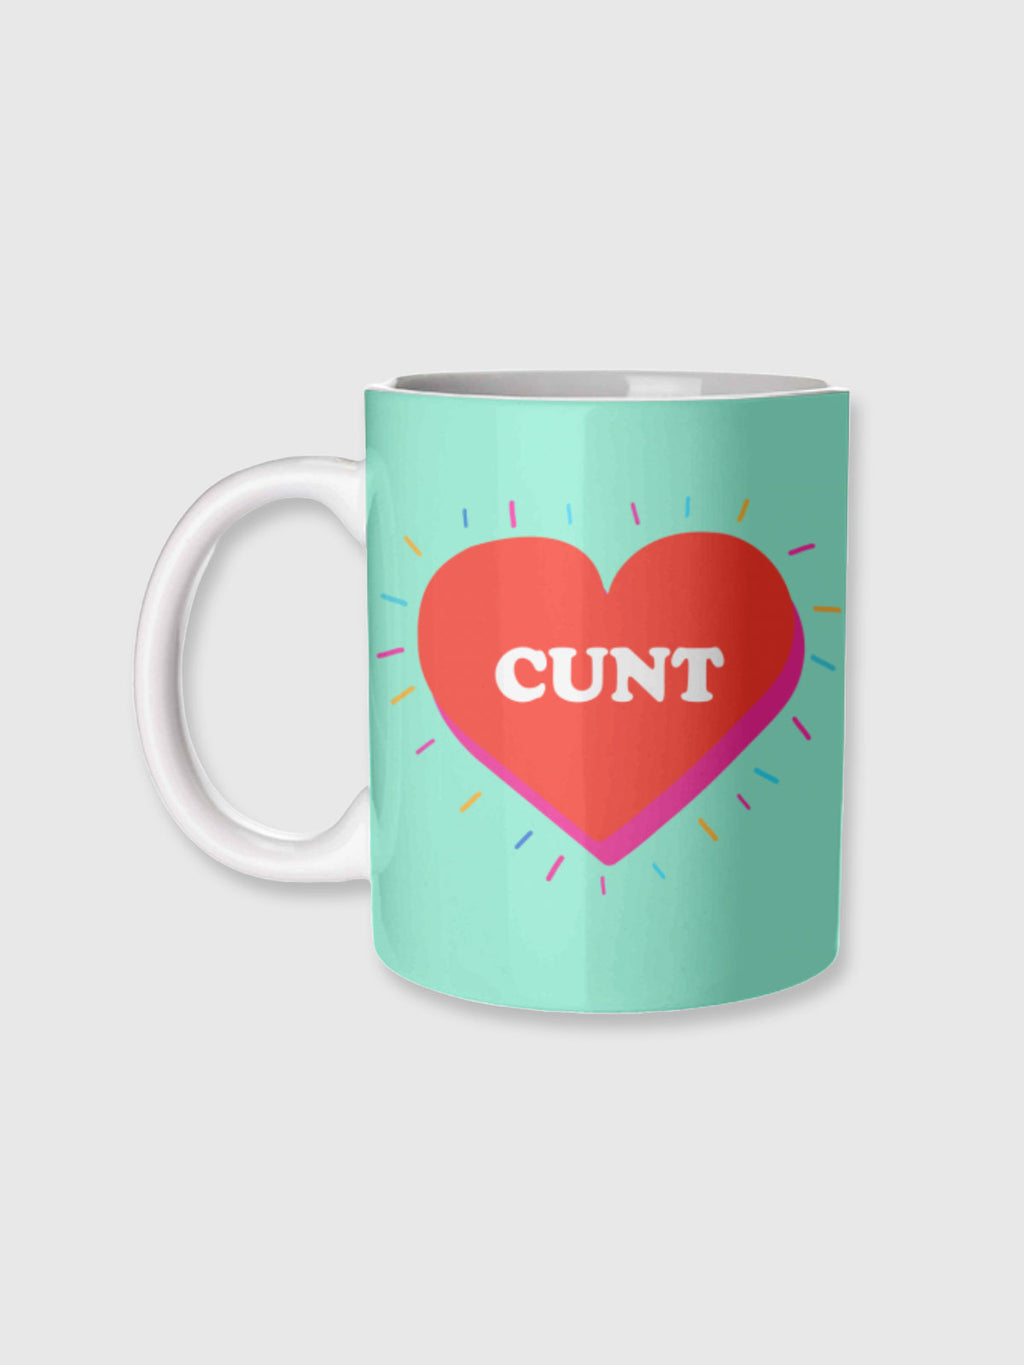 Cup / Mug - Cunt - Green with Heart